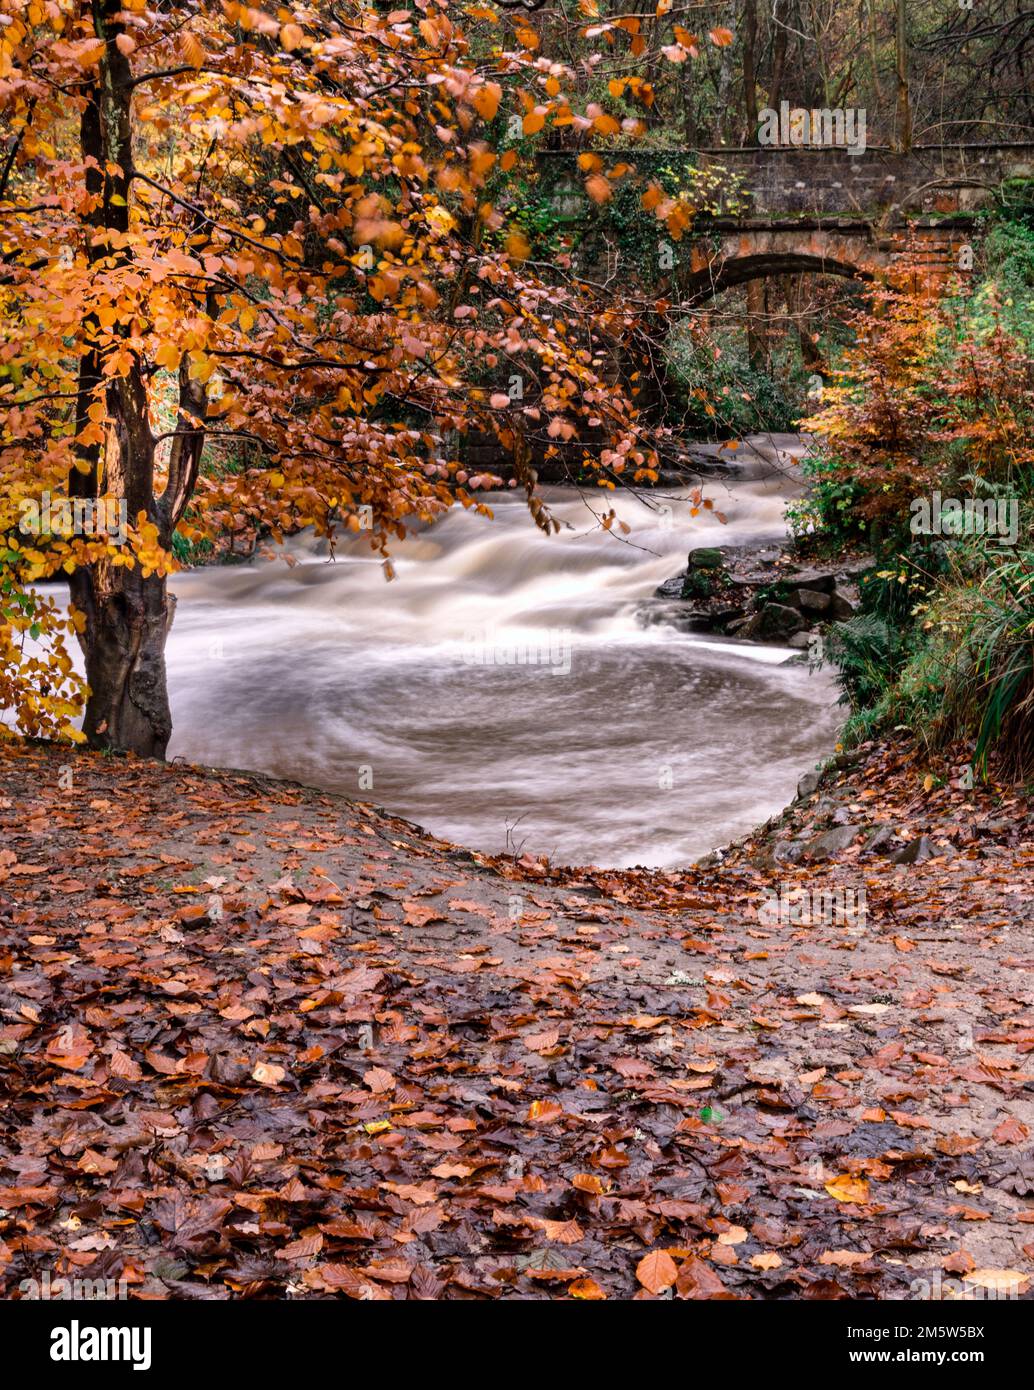 Swirling pool of water in the North Yorkshire moor national park in autumn. Stock Photo